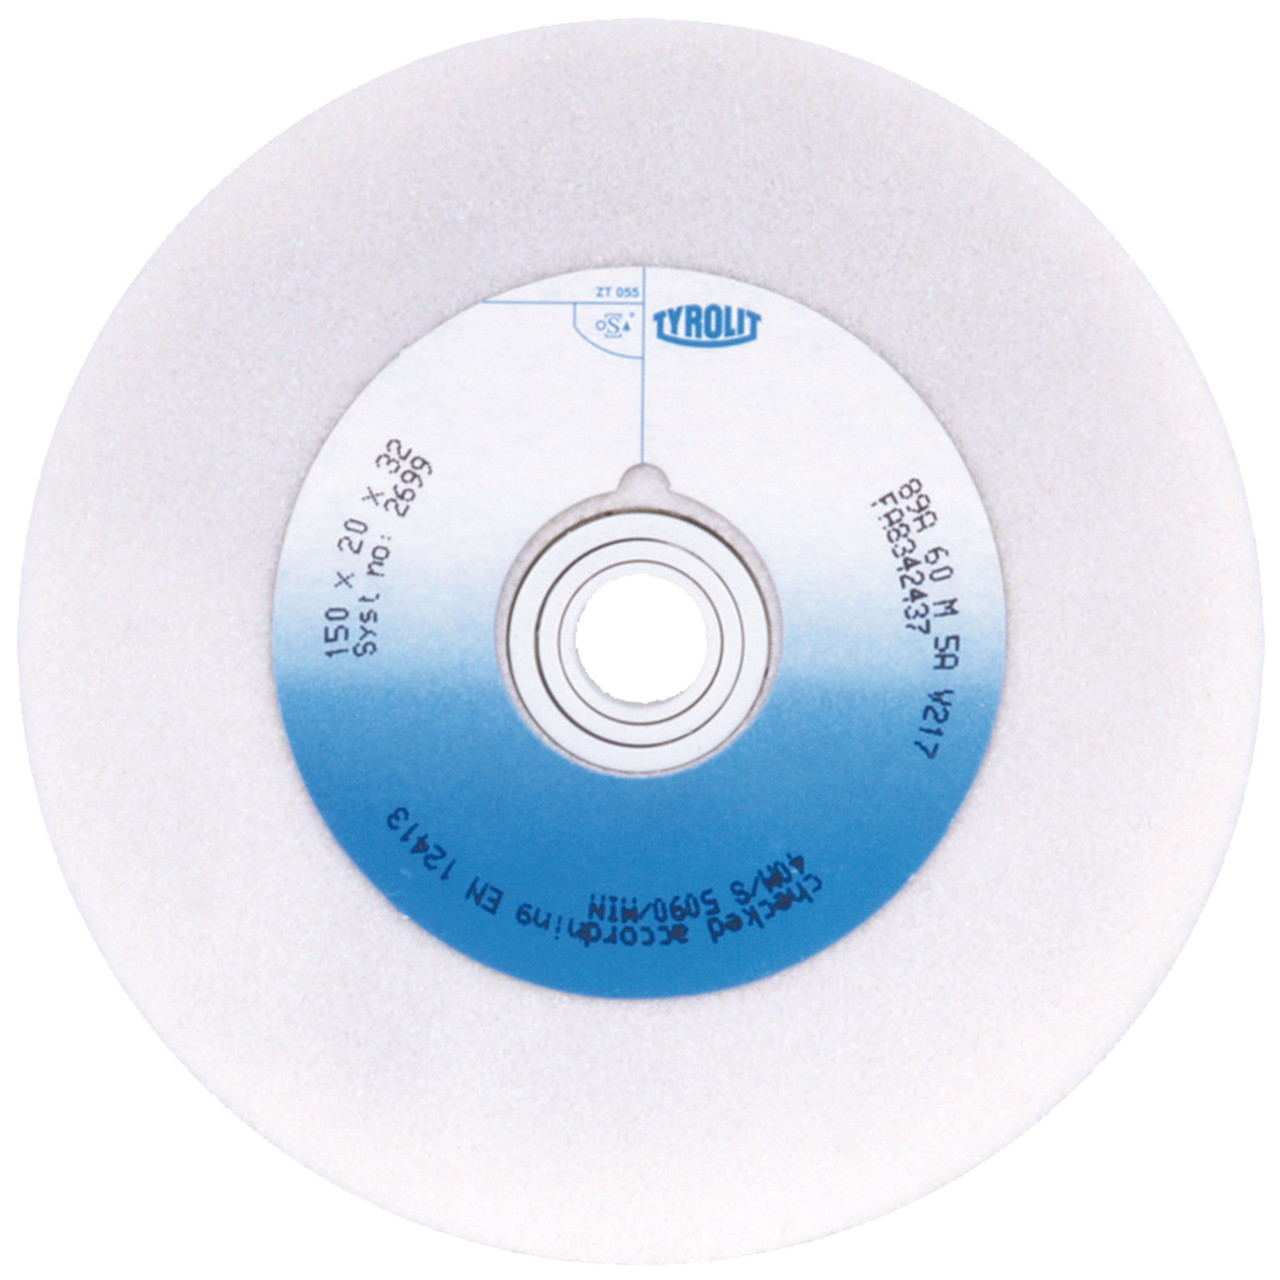 Tyrolit Conventional ceramic grinding discs DxDxH 200x25x20 For high-alloy steels and HSS, shape: 1, Art. 68340